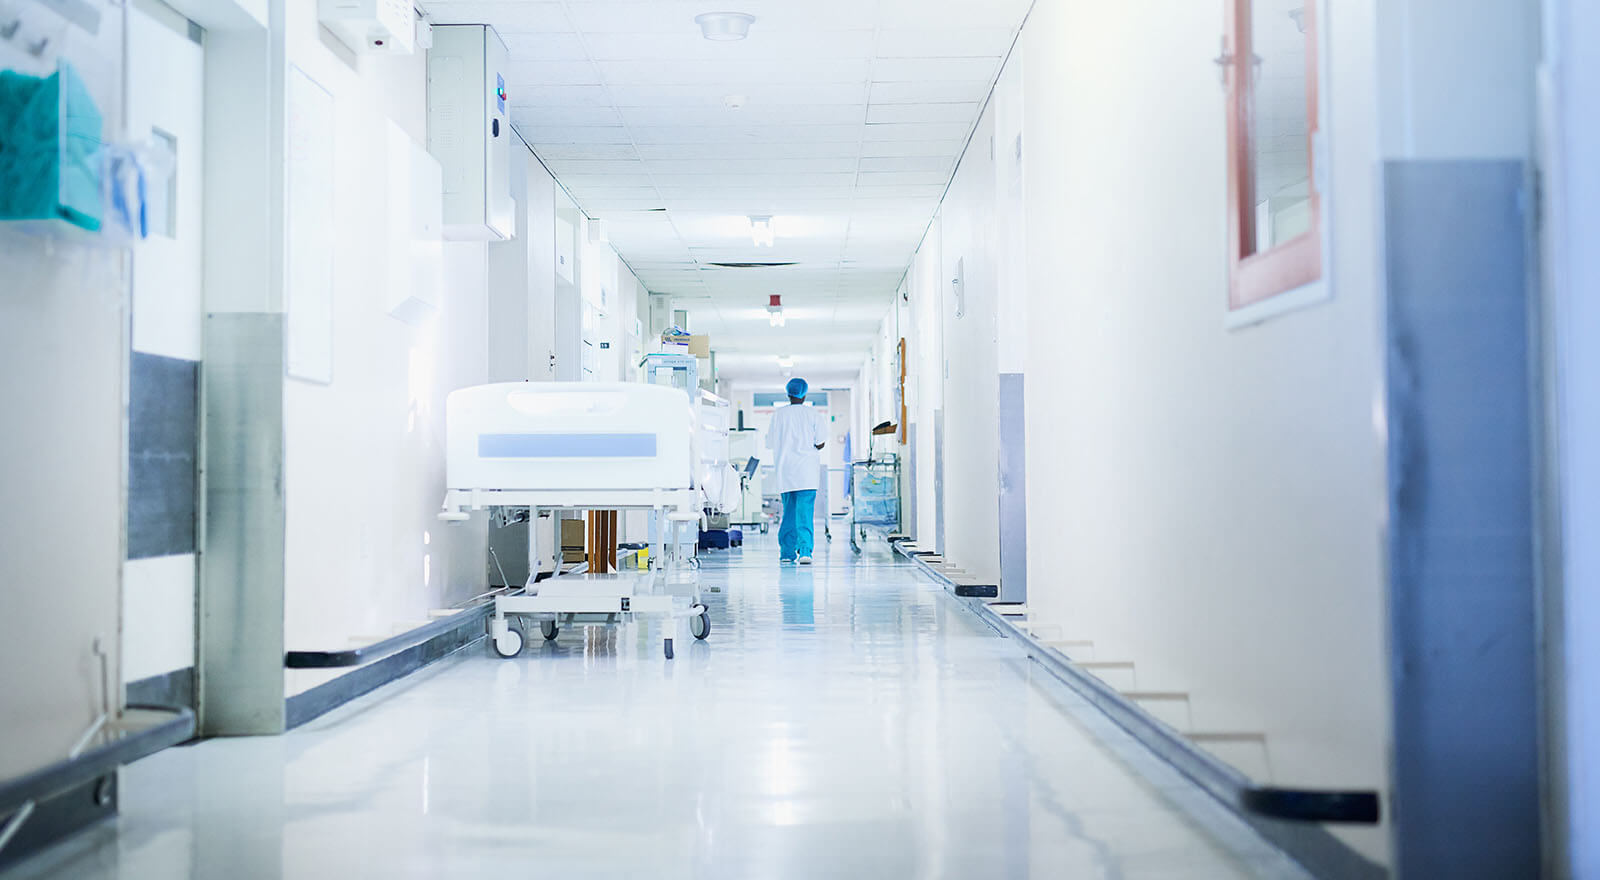 Image of a doctor walking down an empty hospital corridor